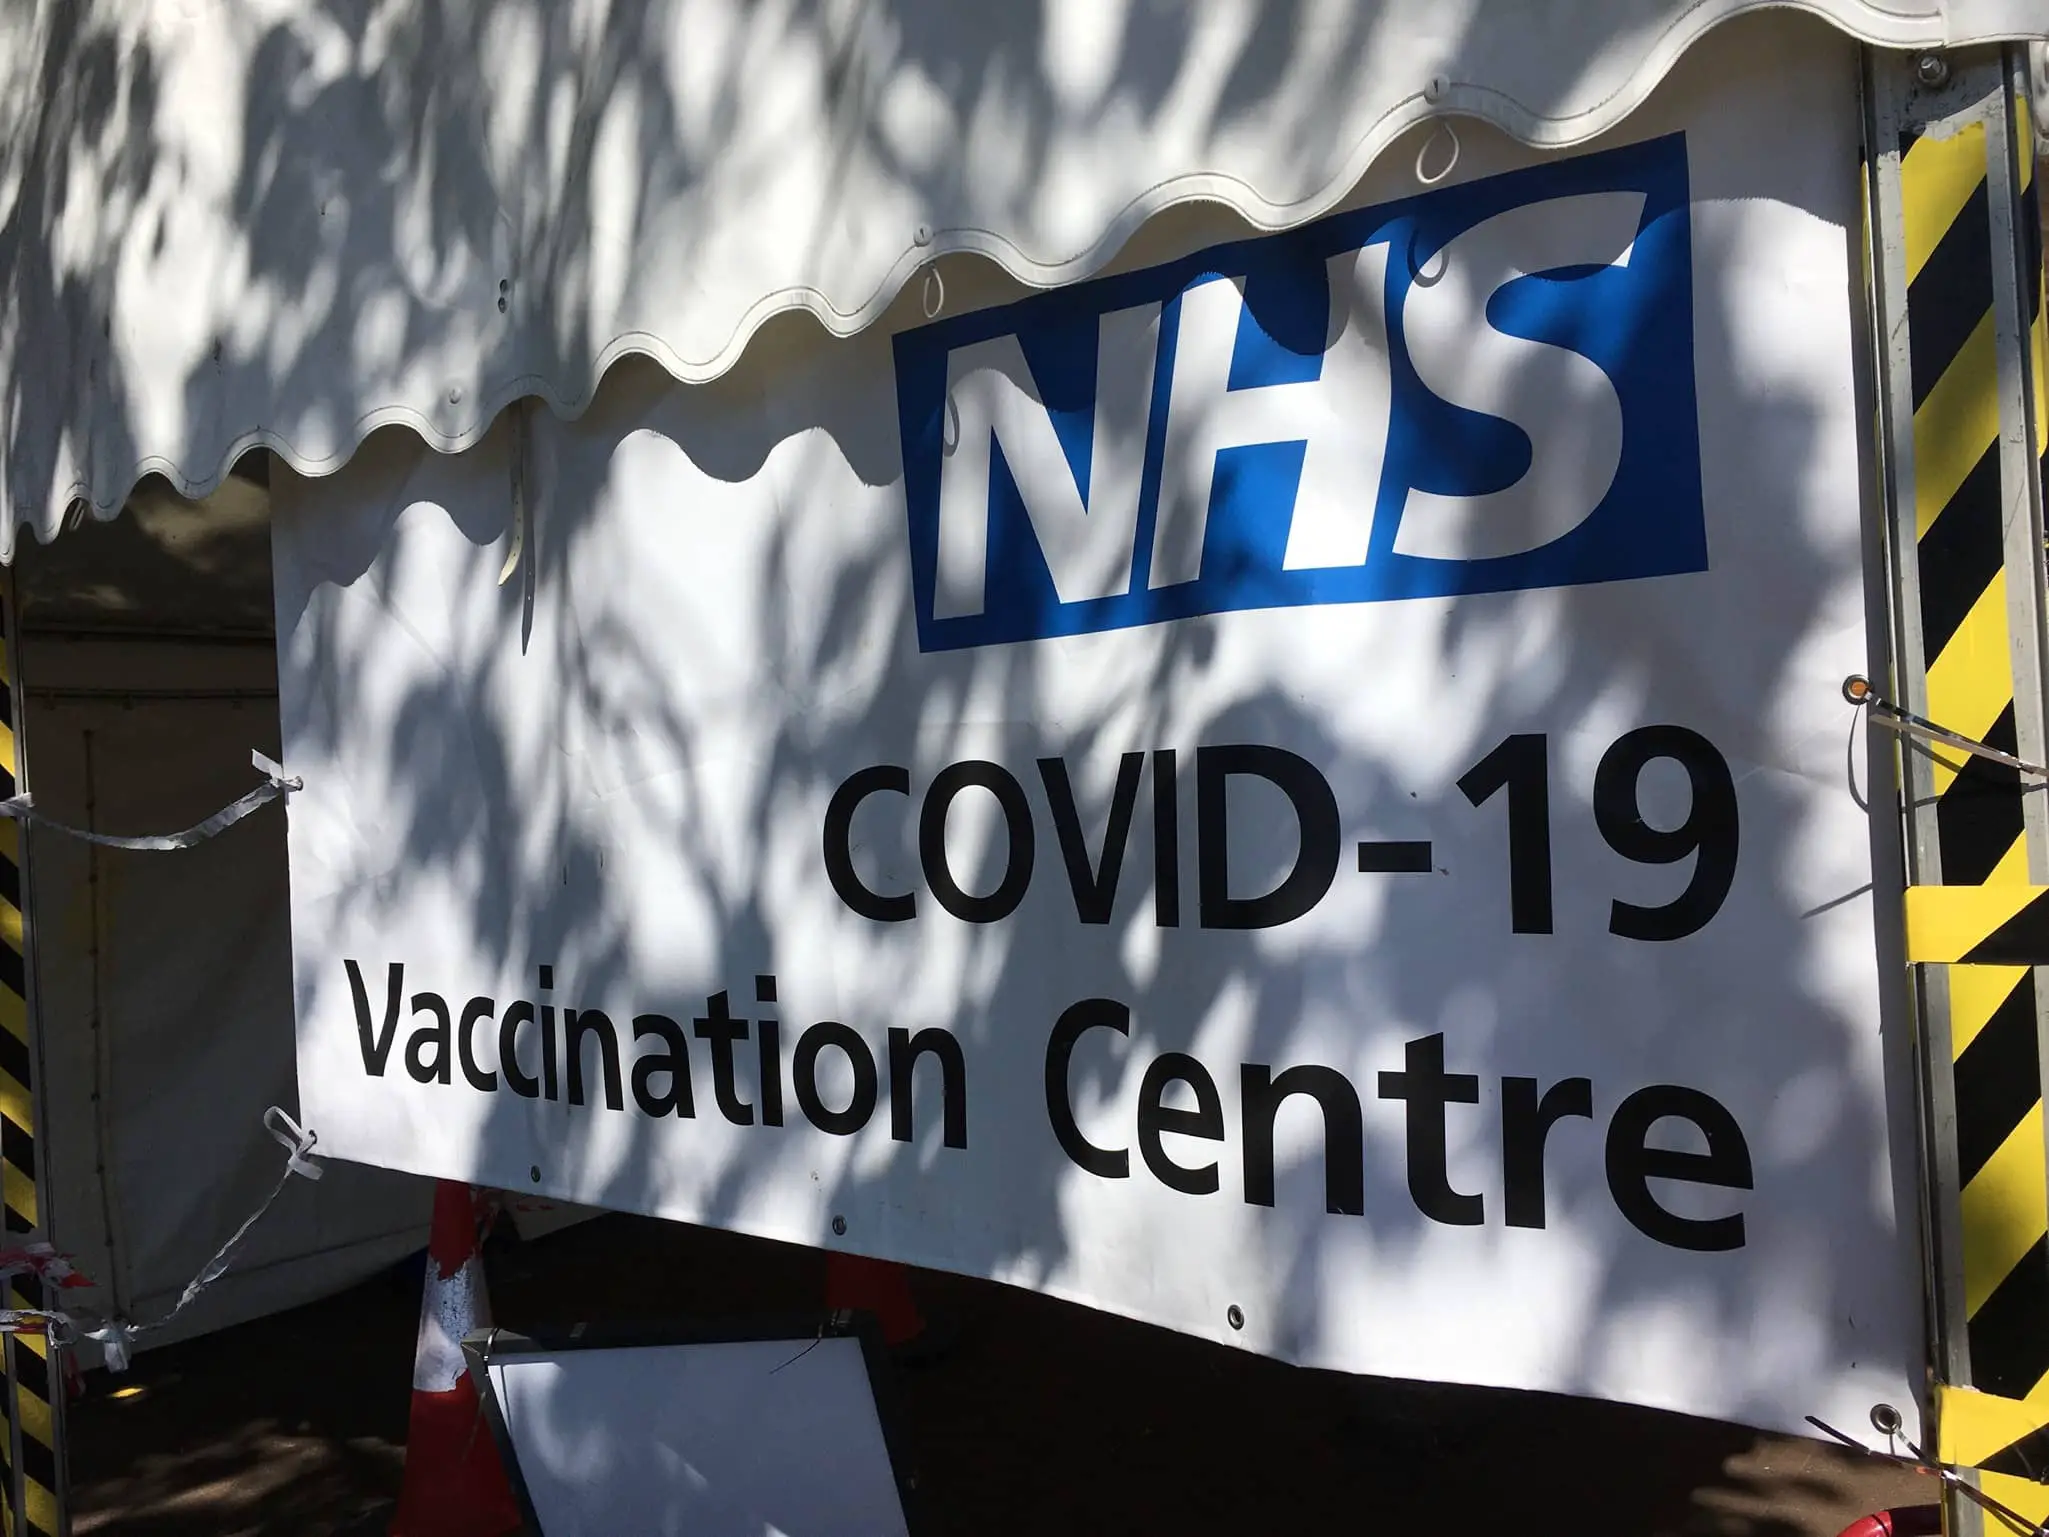 NHS vaccination sign